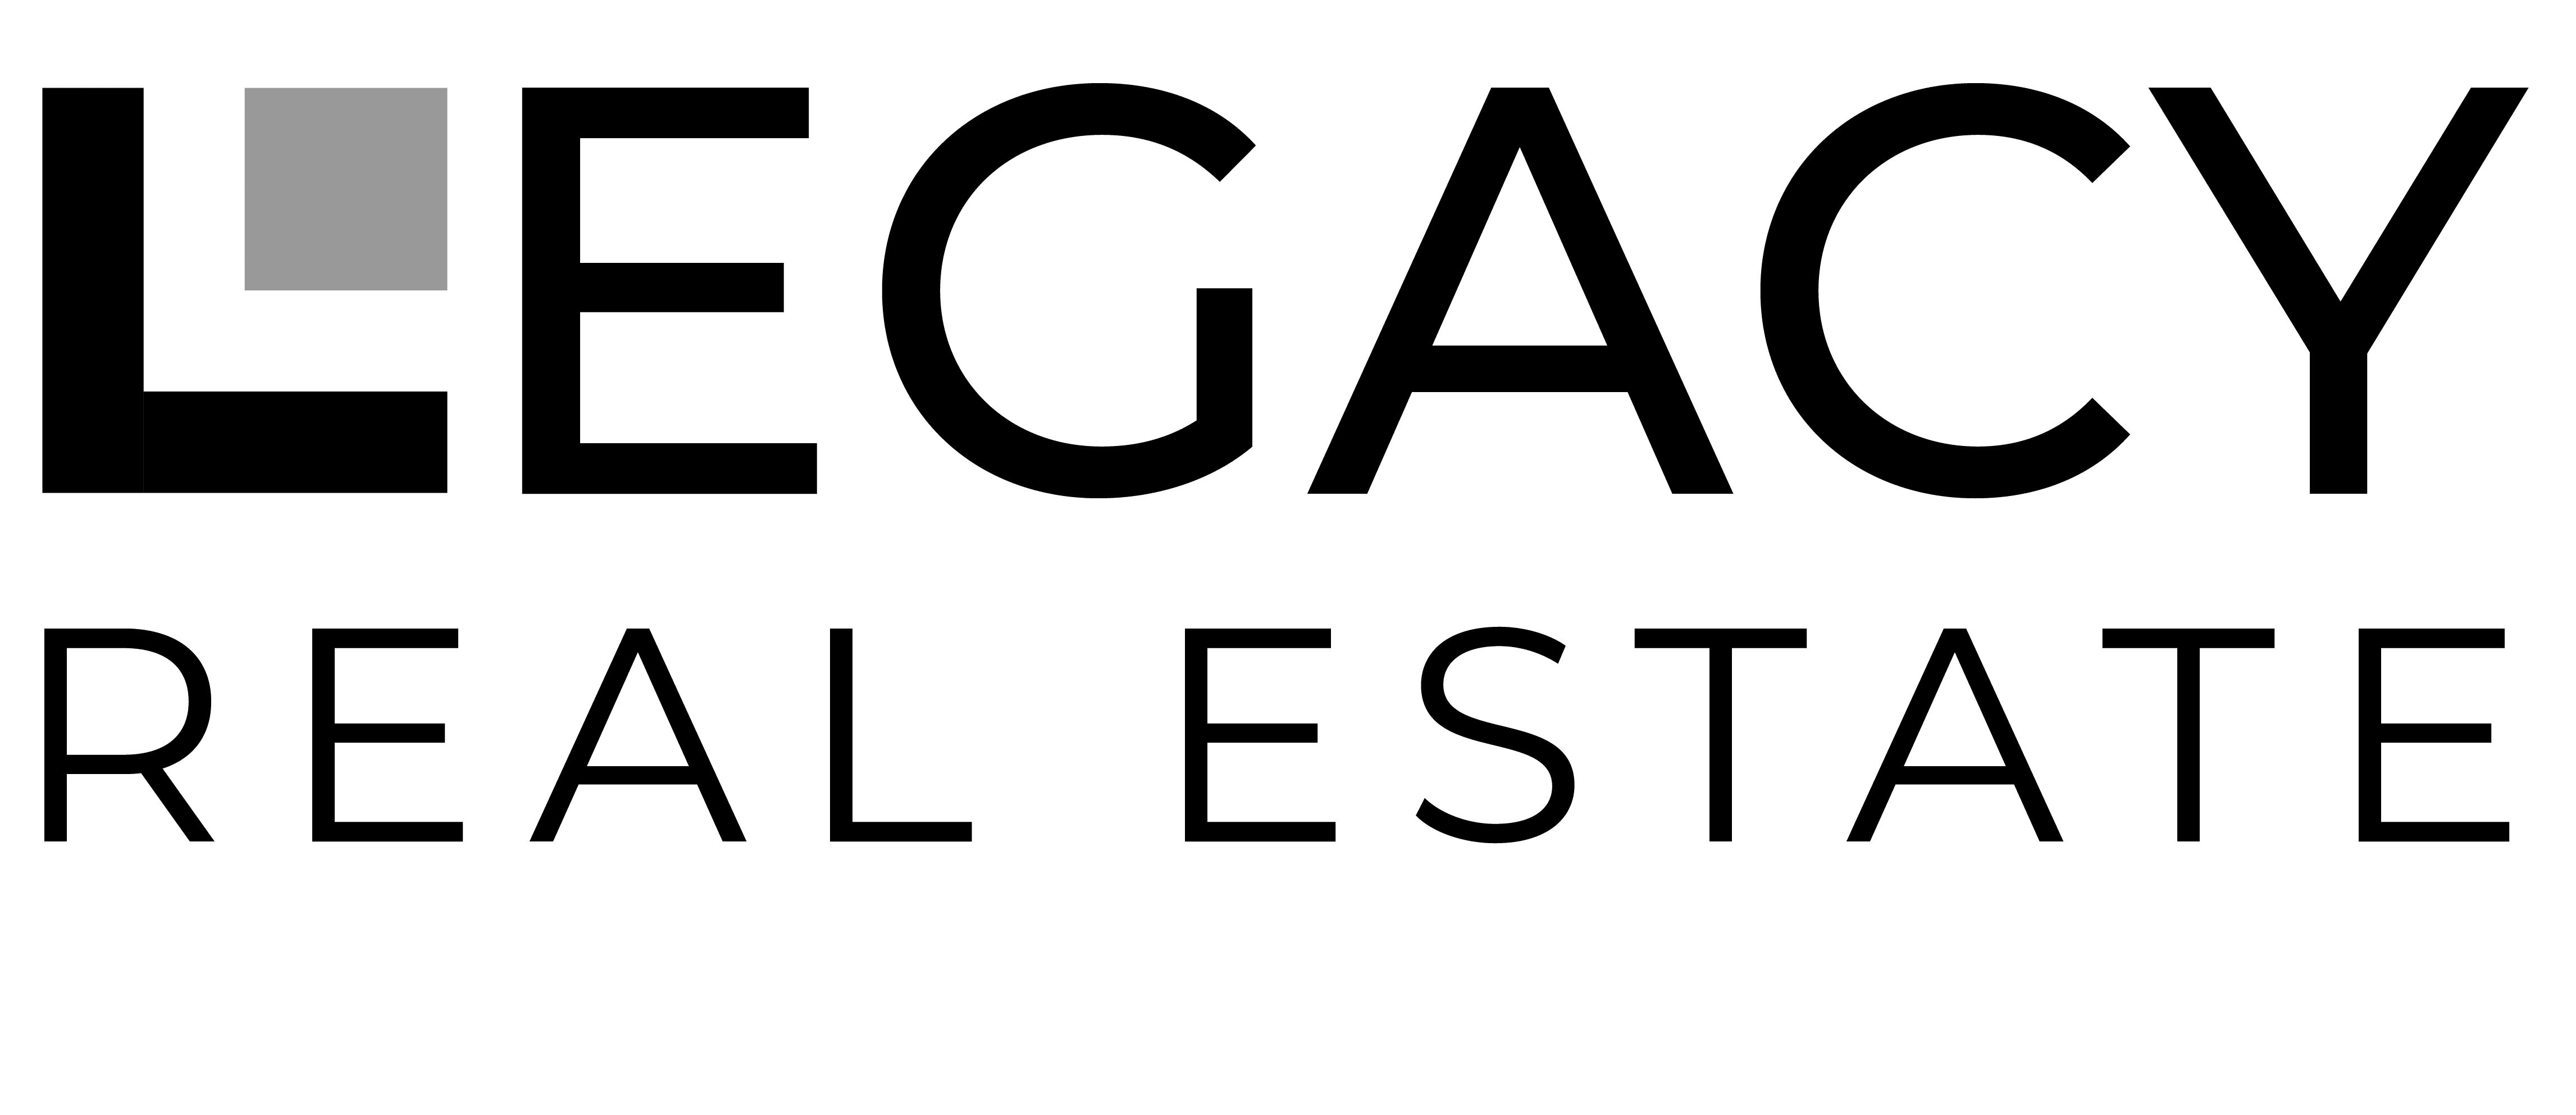 Legacy Real Estate - Corporate